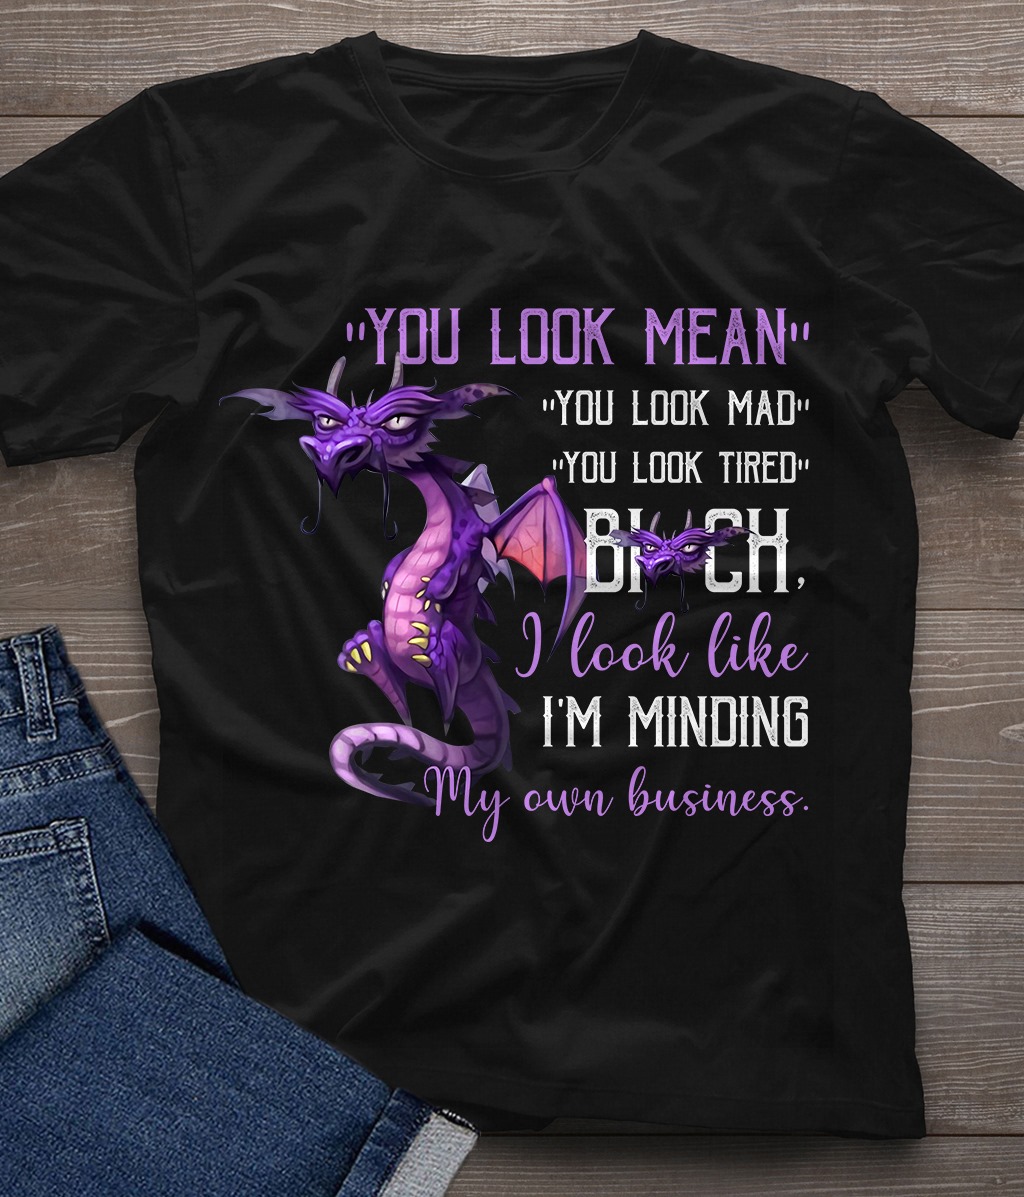 You look mean you look mad you look tired bitch I look like I'm minding my own buisiness - Dragon lover